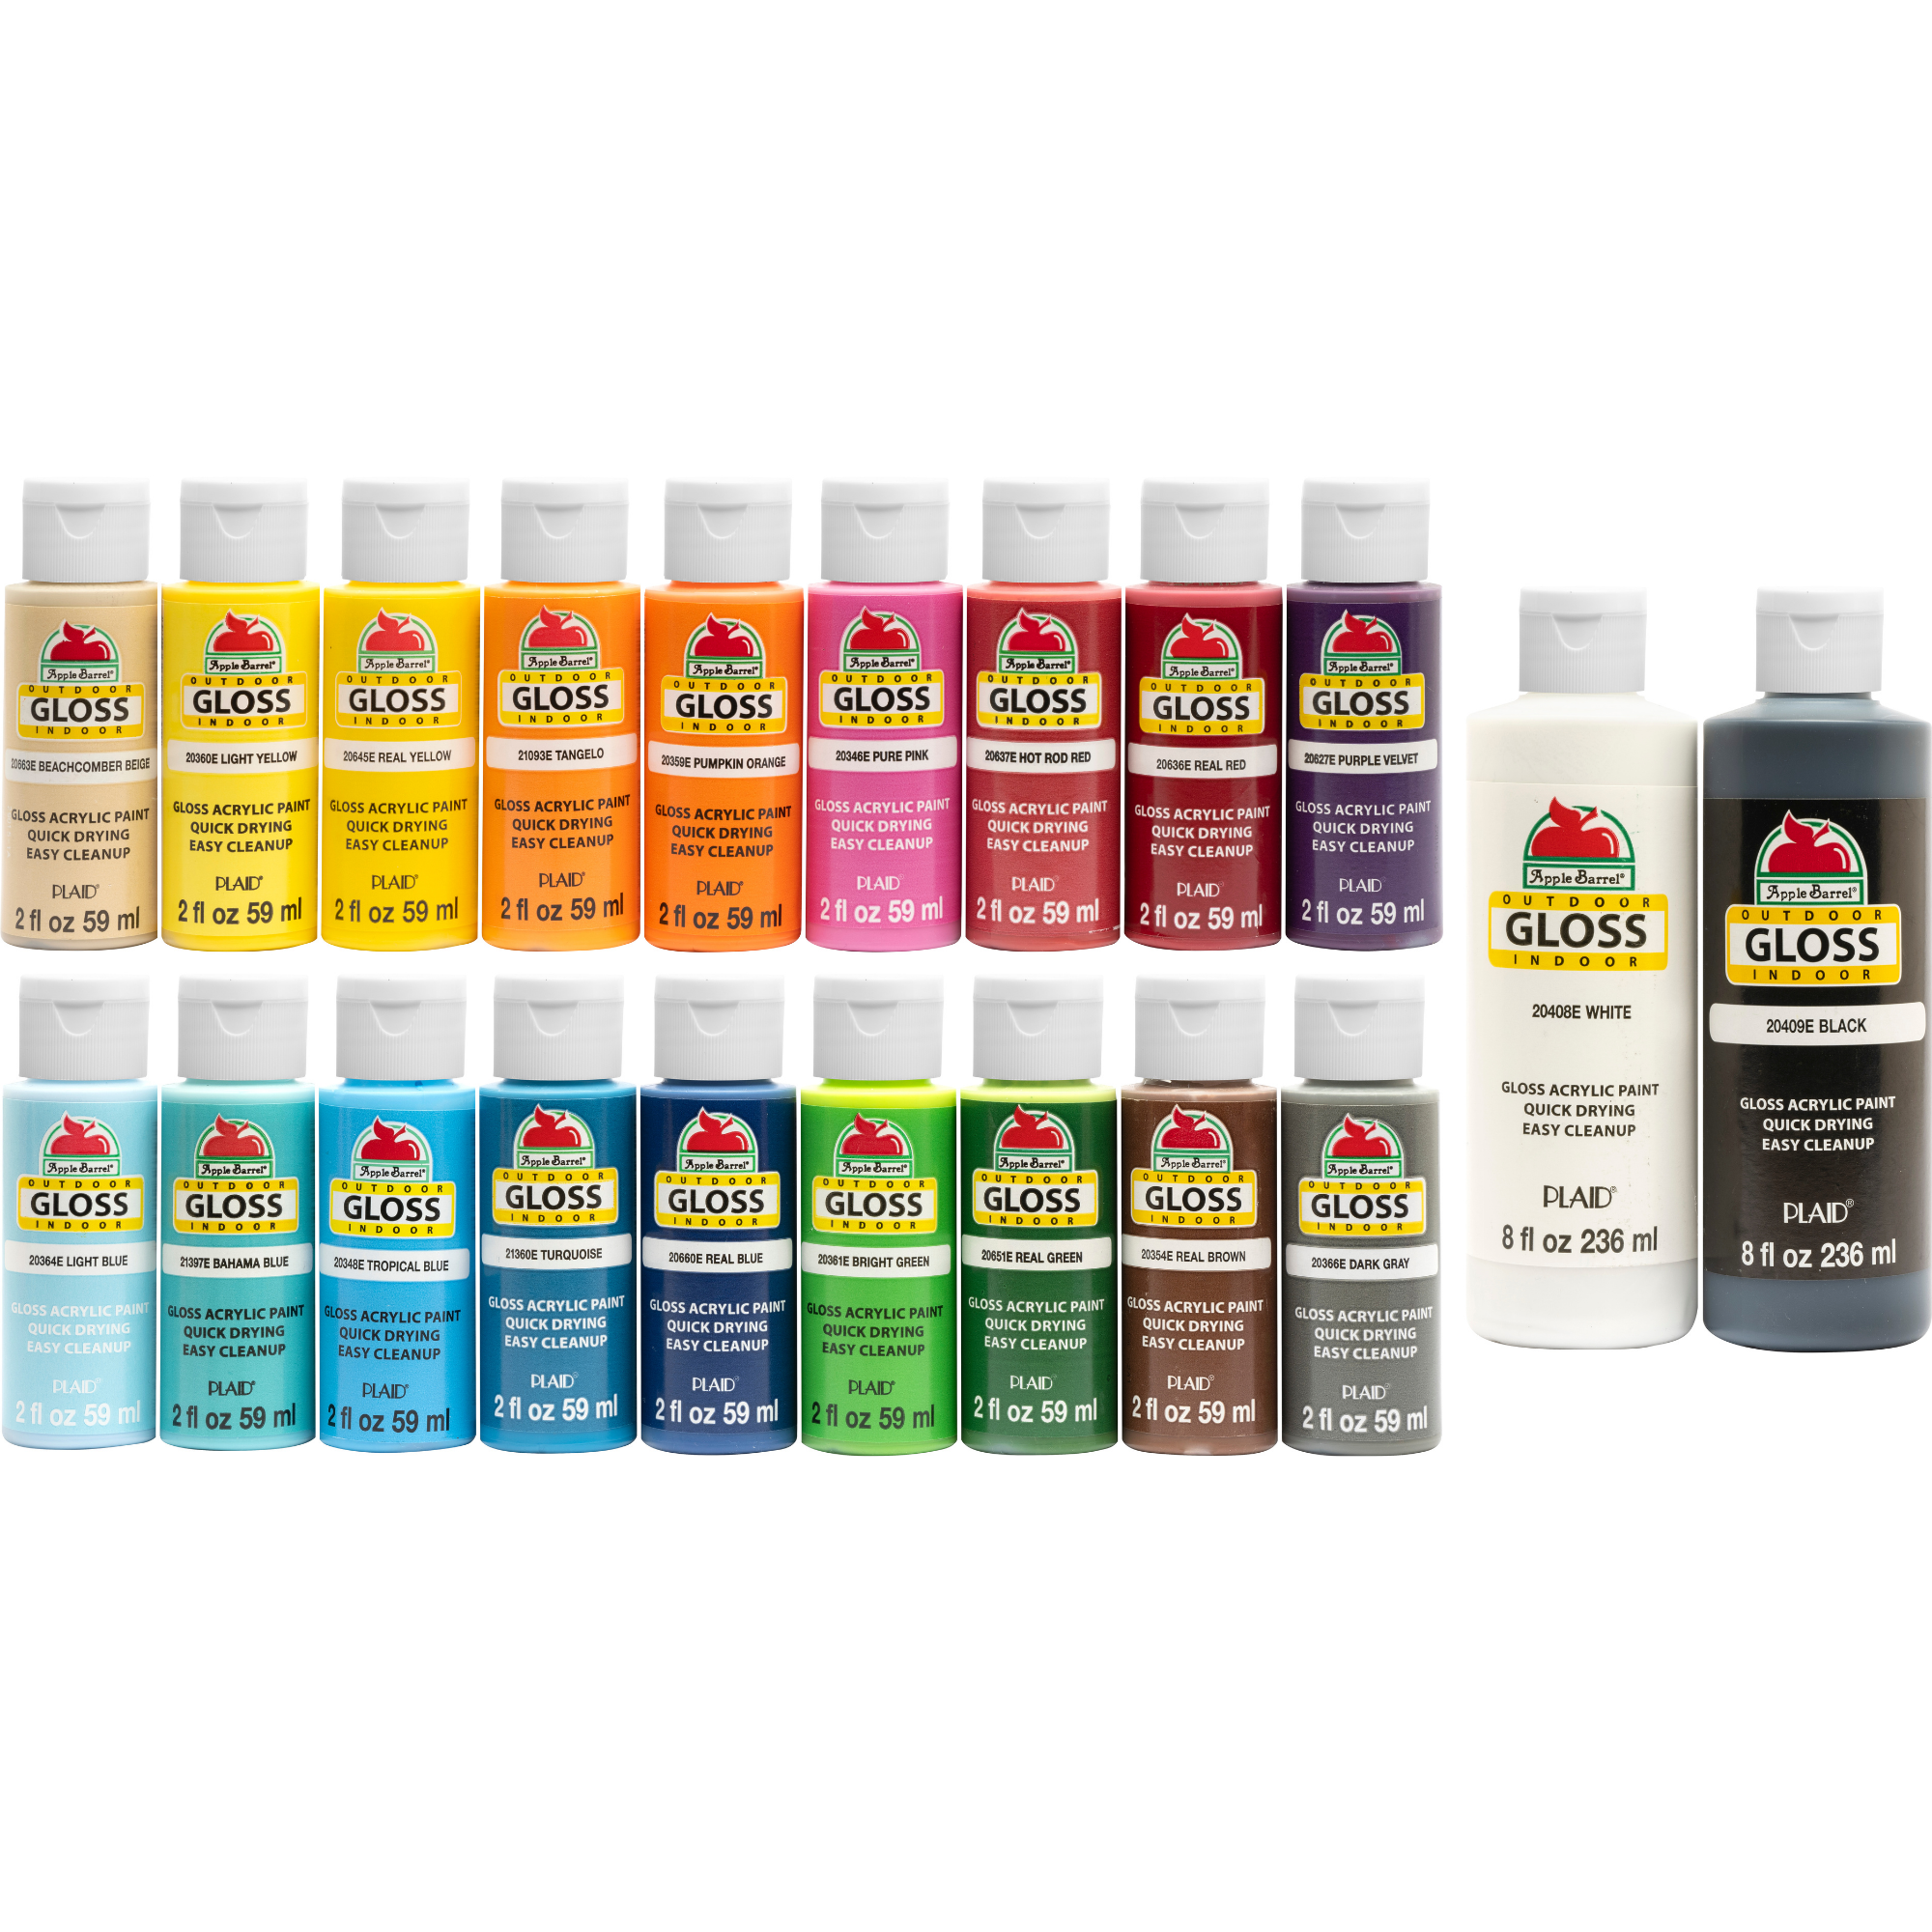 Apple Barrel Multi-color Gloss Acrylic Craft Paint (20 Pieces) - image 1 of 9